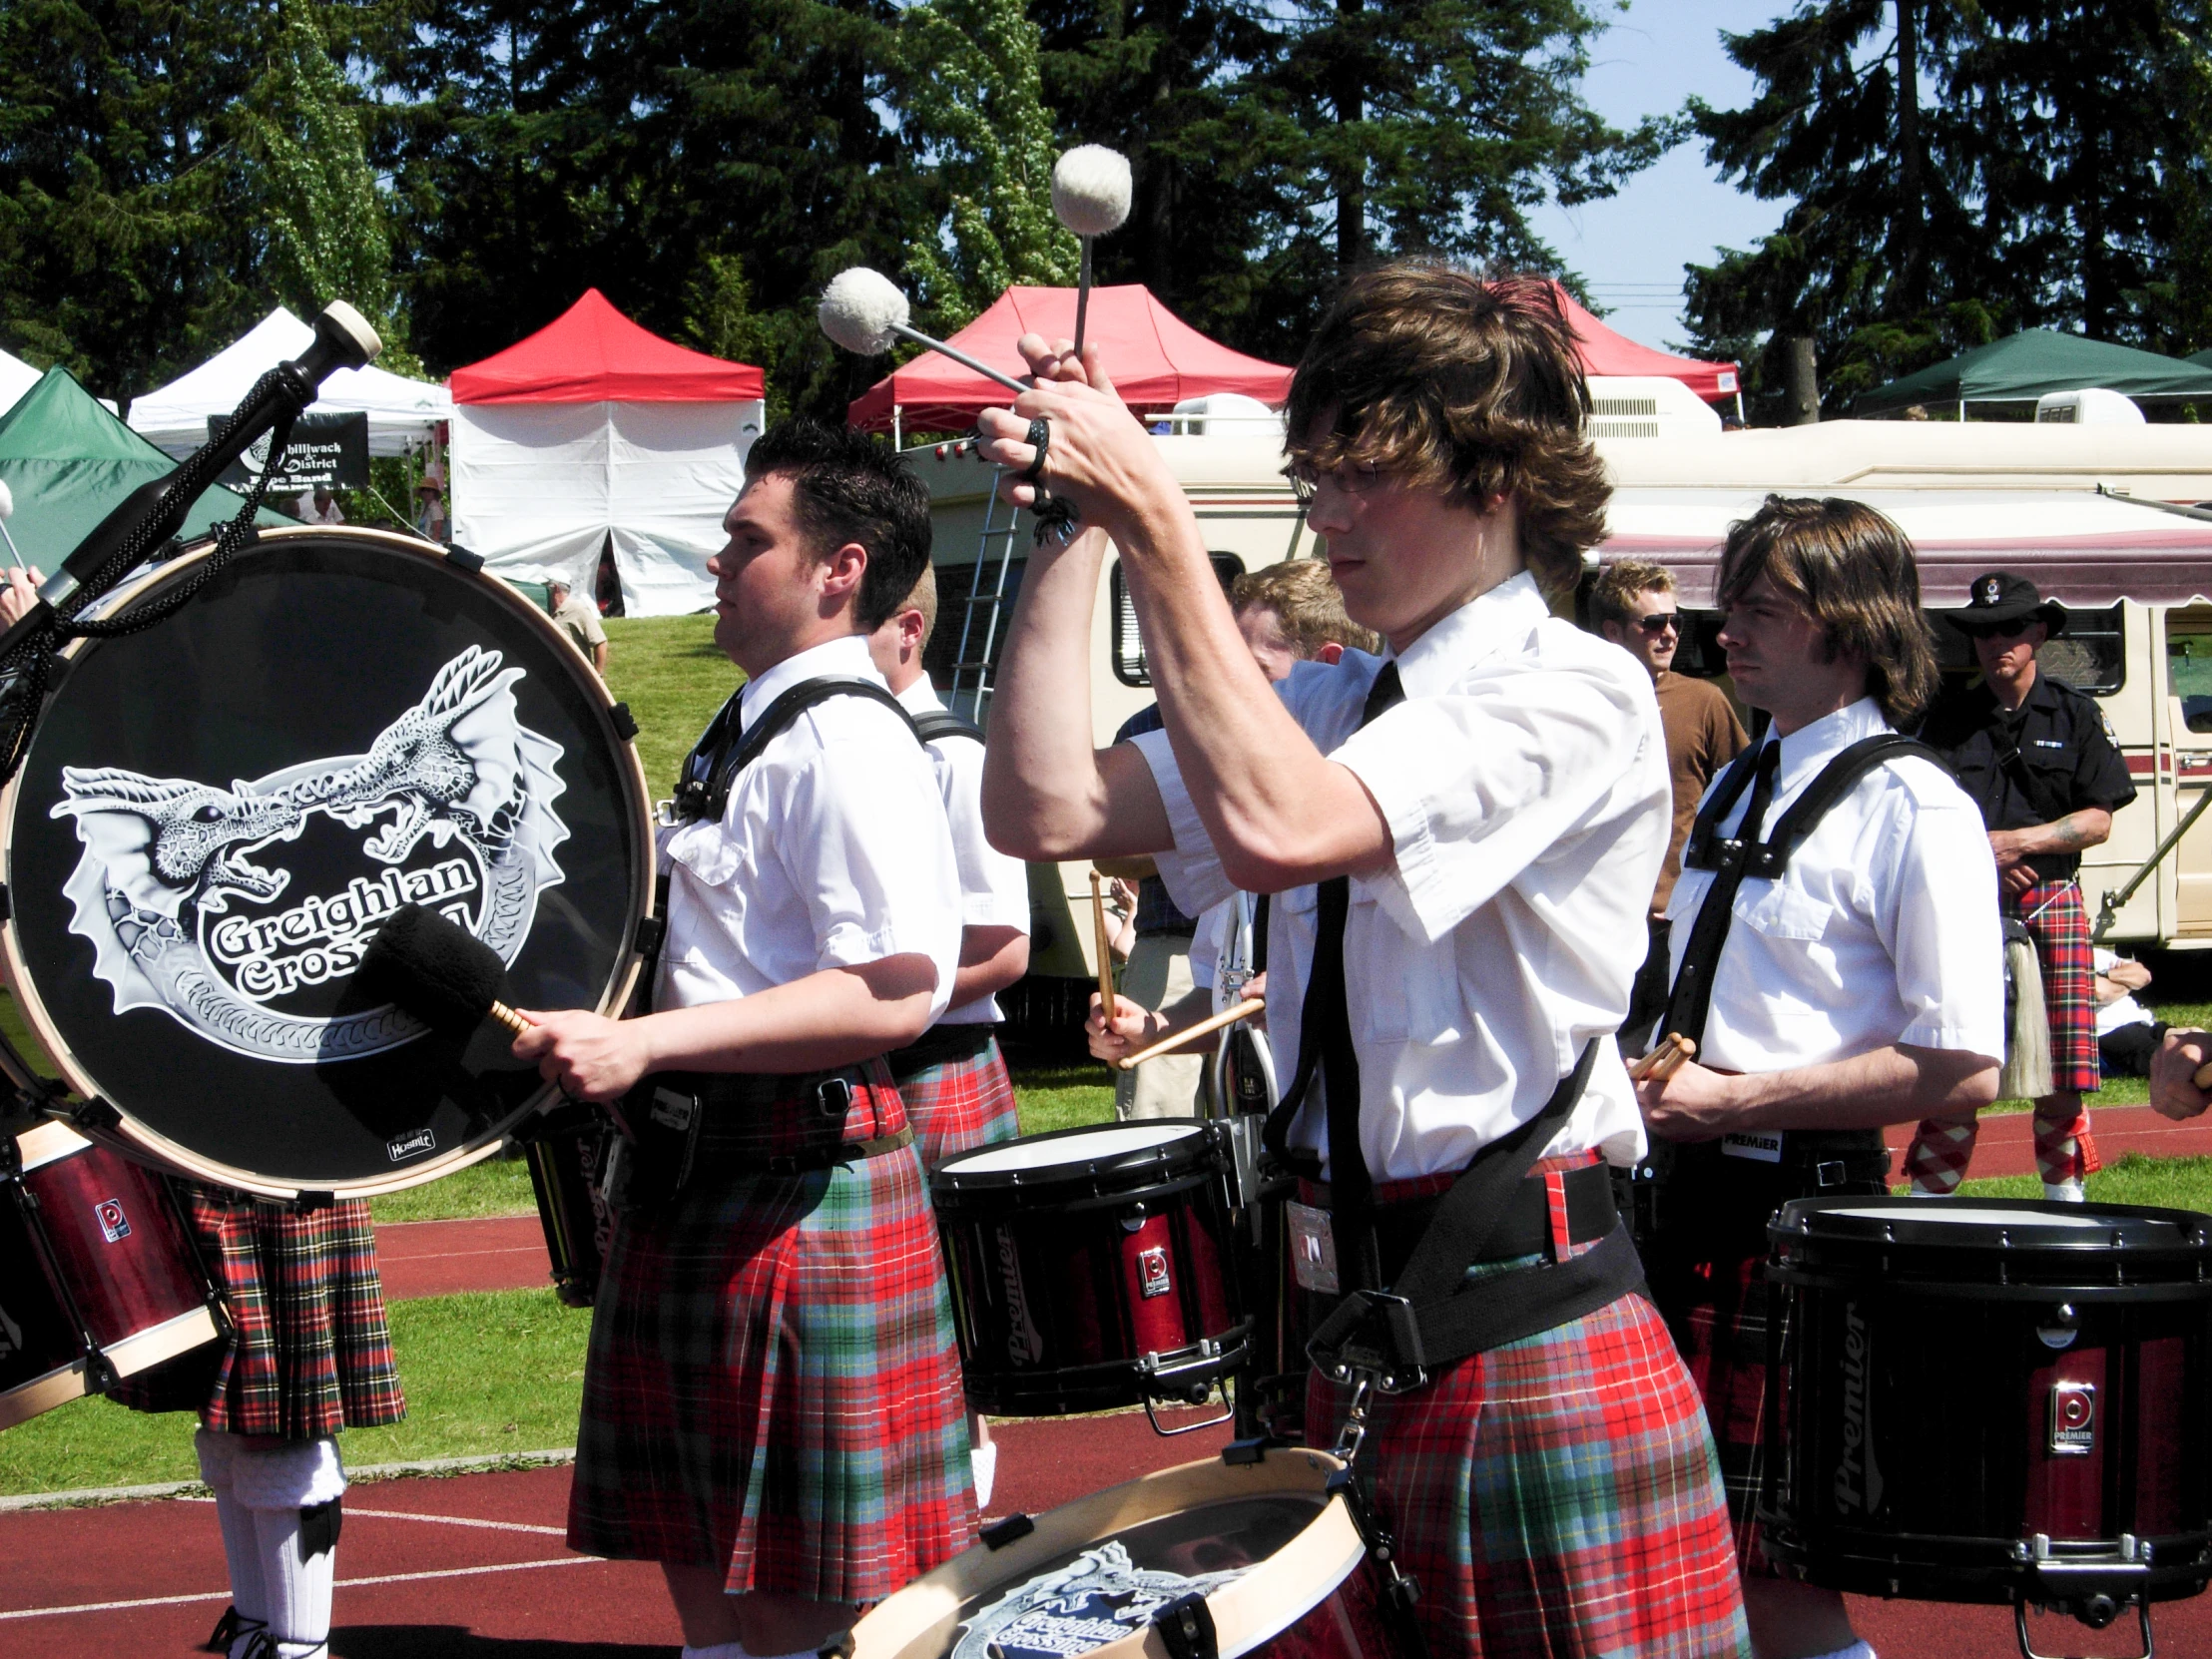 some men wearing kilts are holding drums